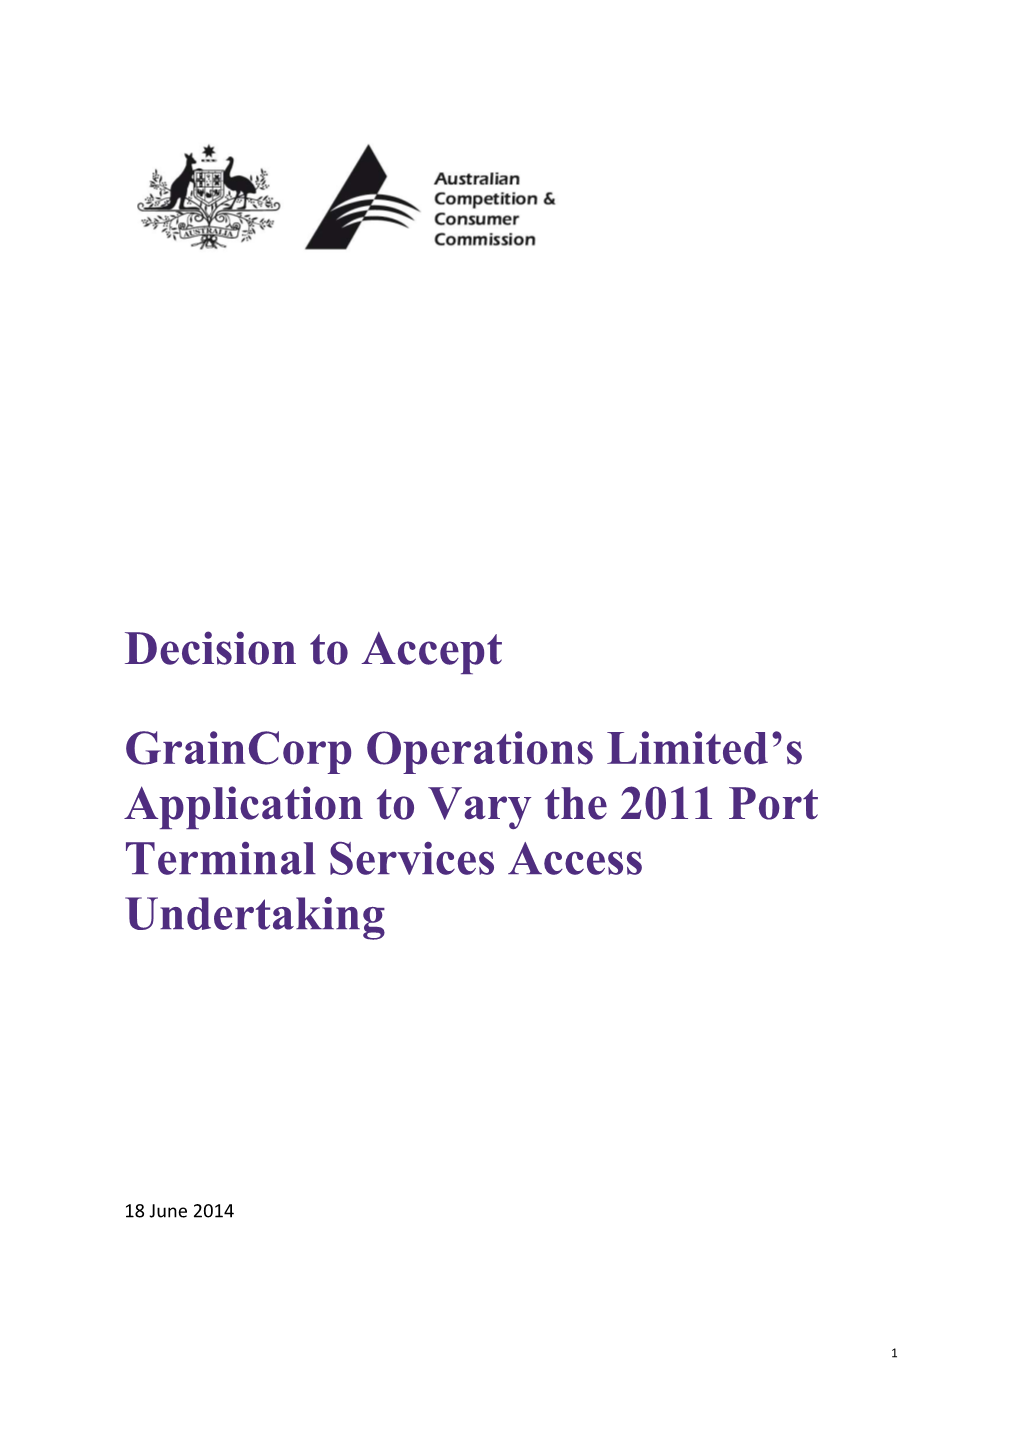 Graincorp Operations Limited S Application to Vary the 2011 Port Terminal Services Access